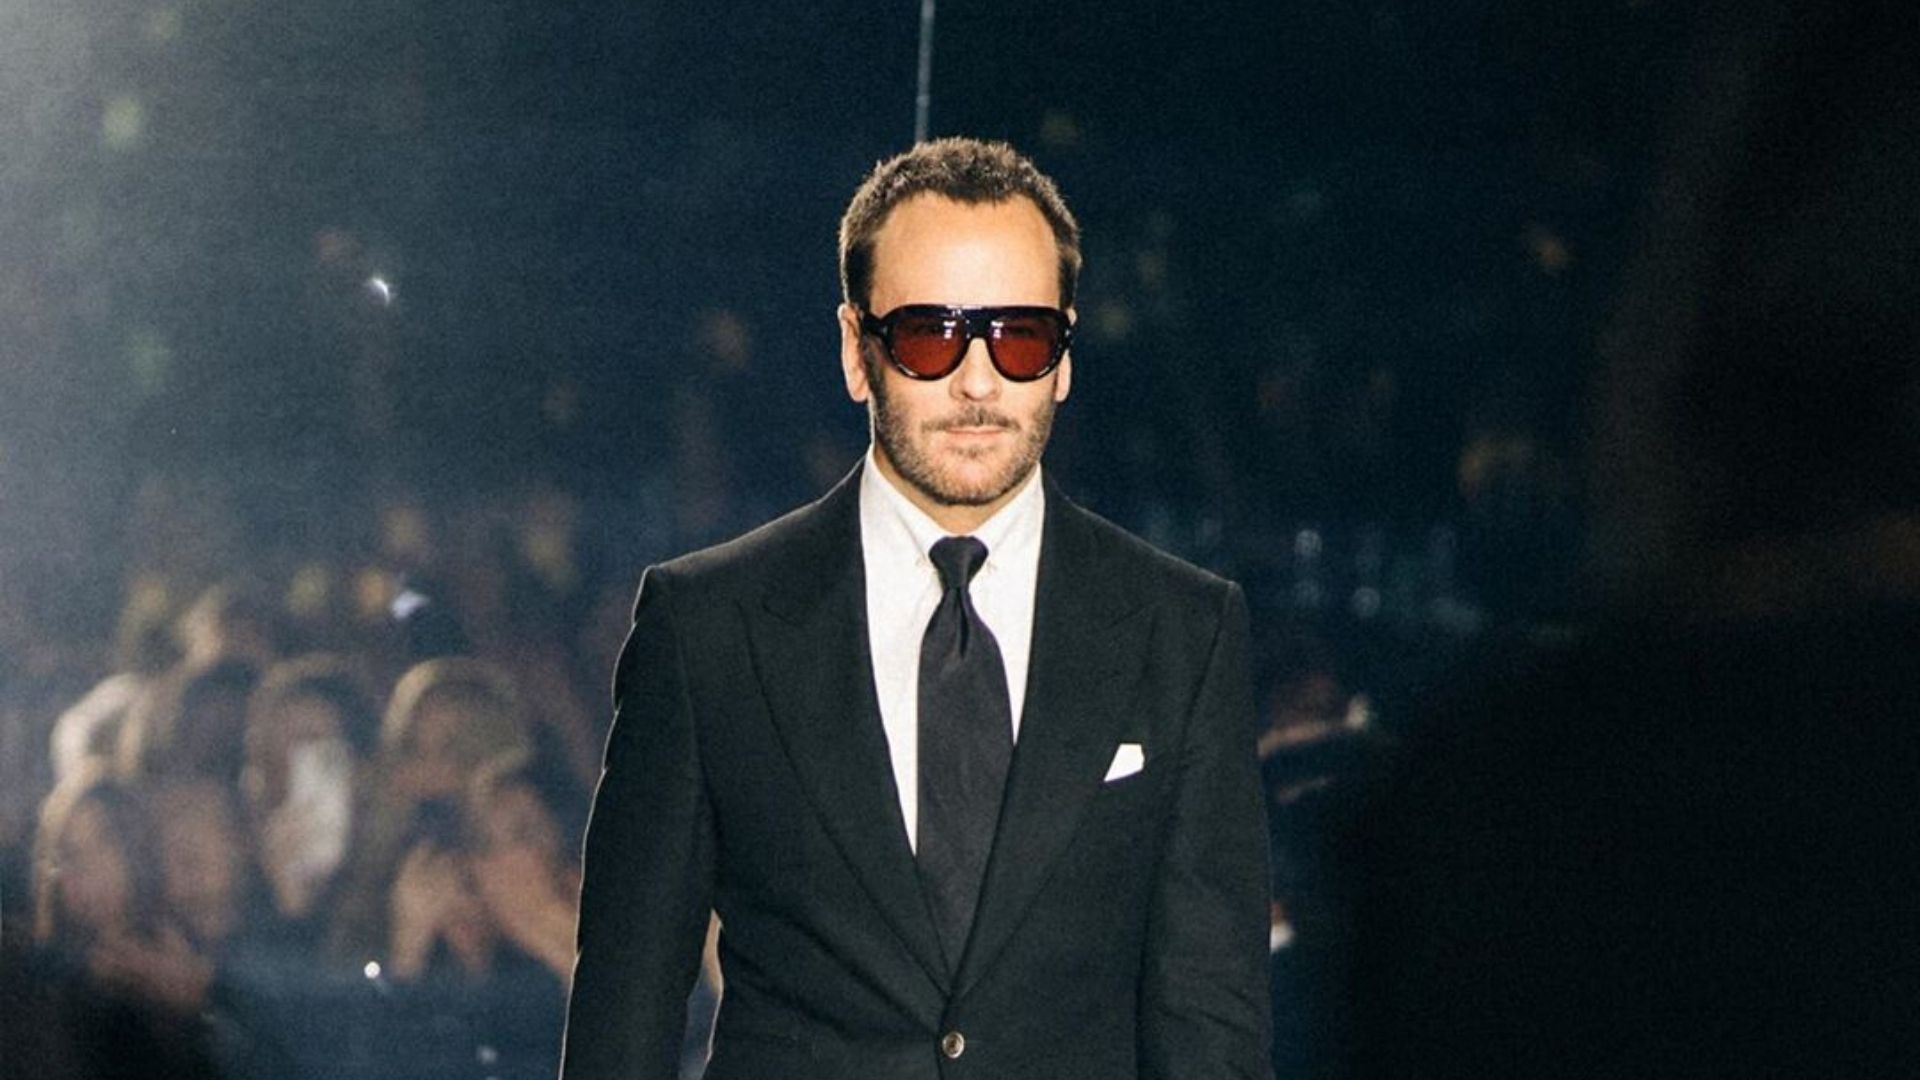 Tom Ford Show In Los Angeles Did Tom Ford Betray NYFW? Harper's